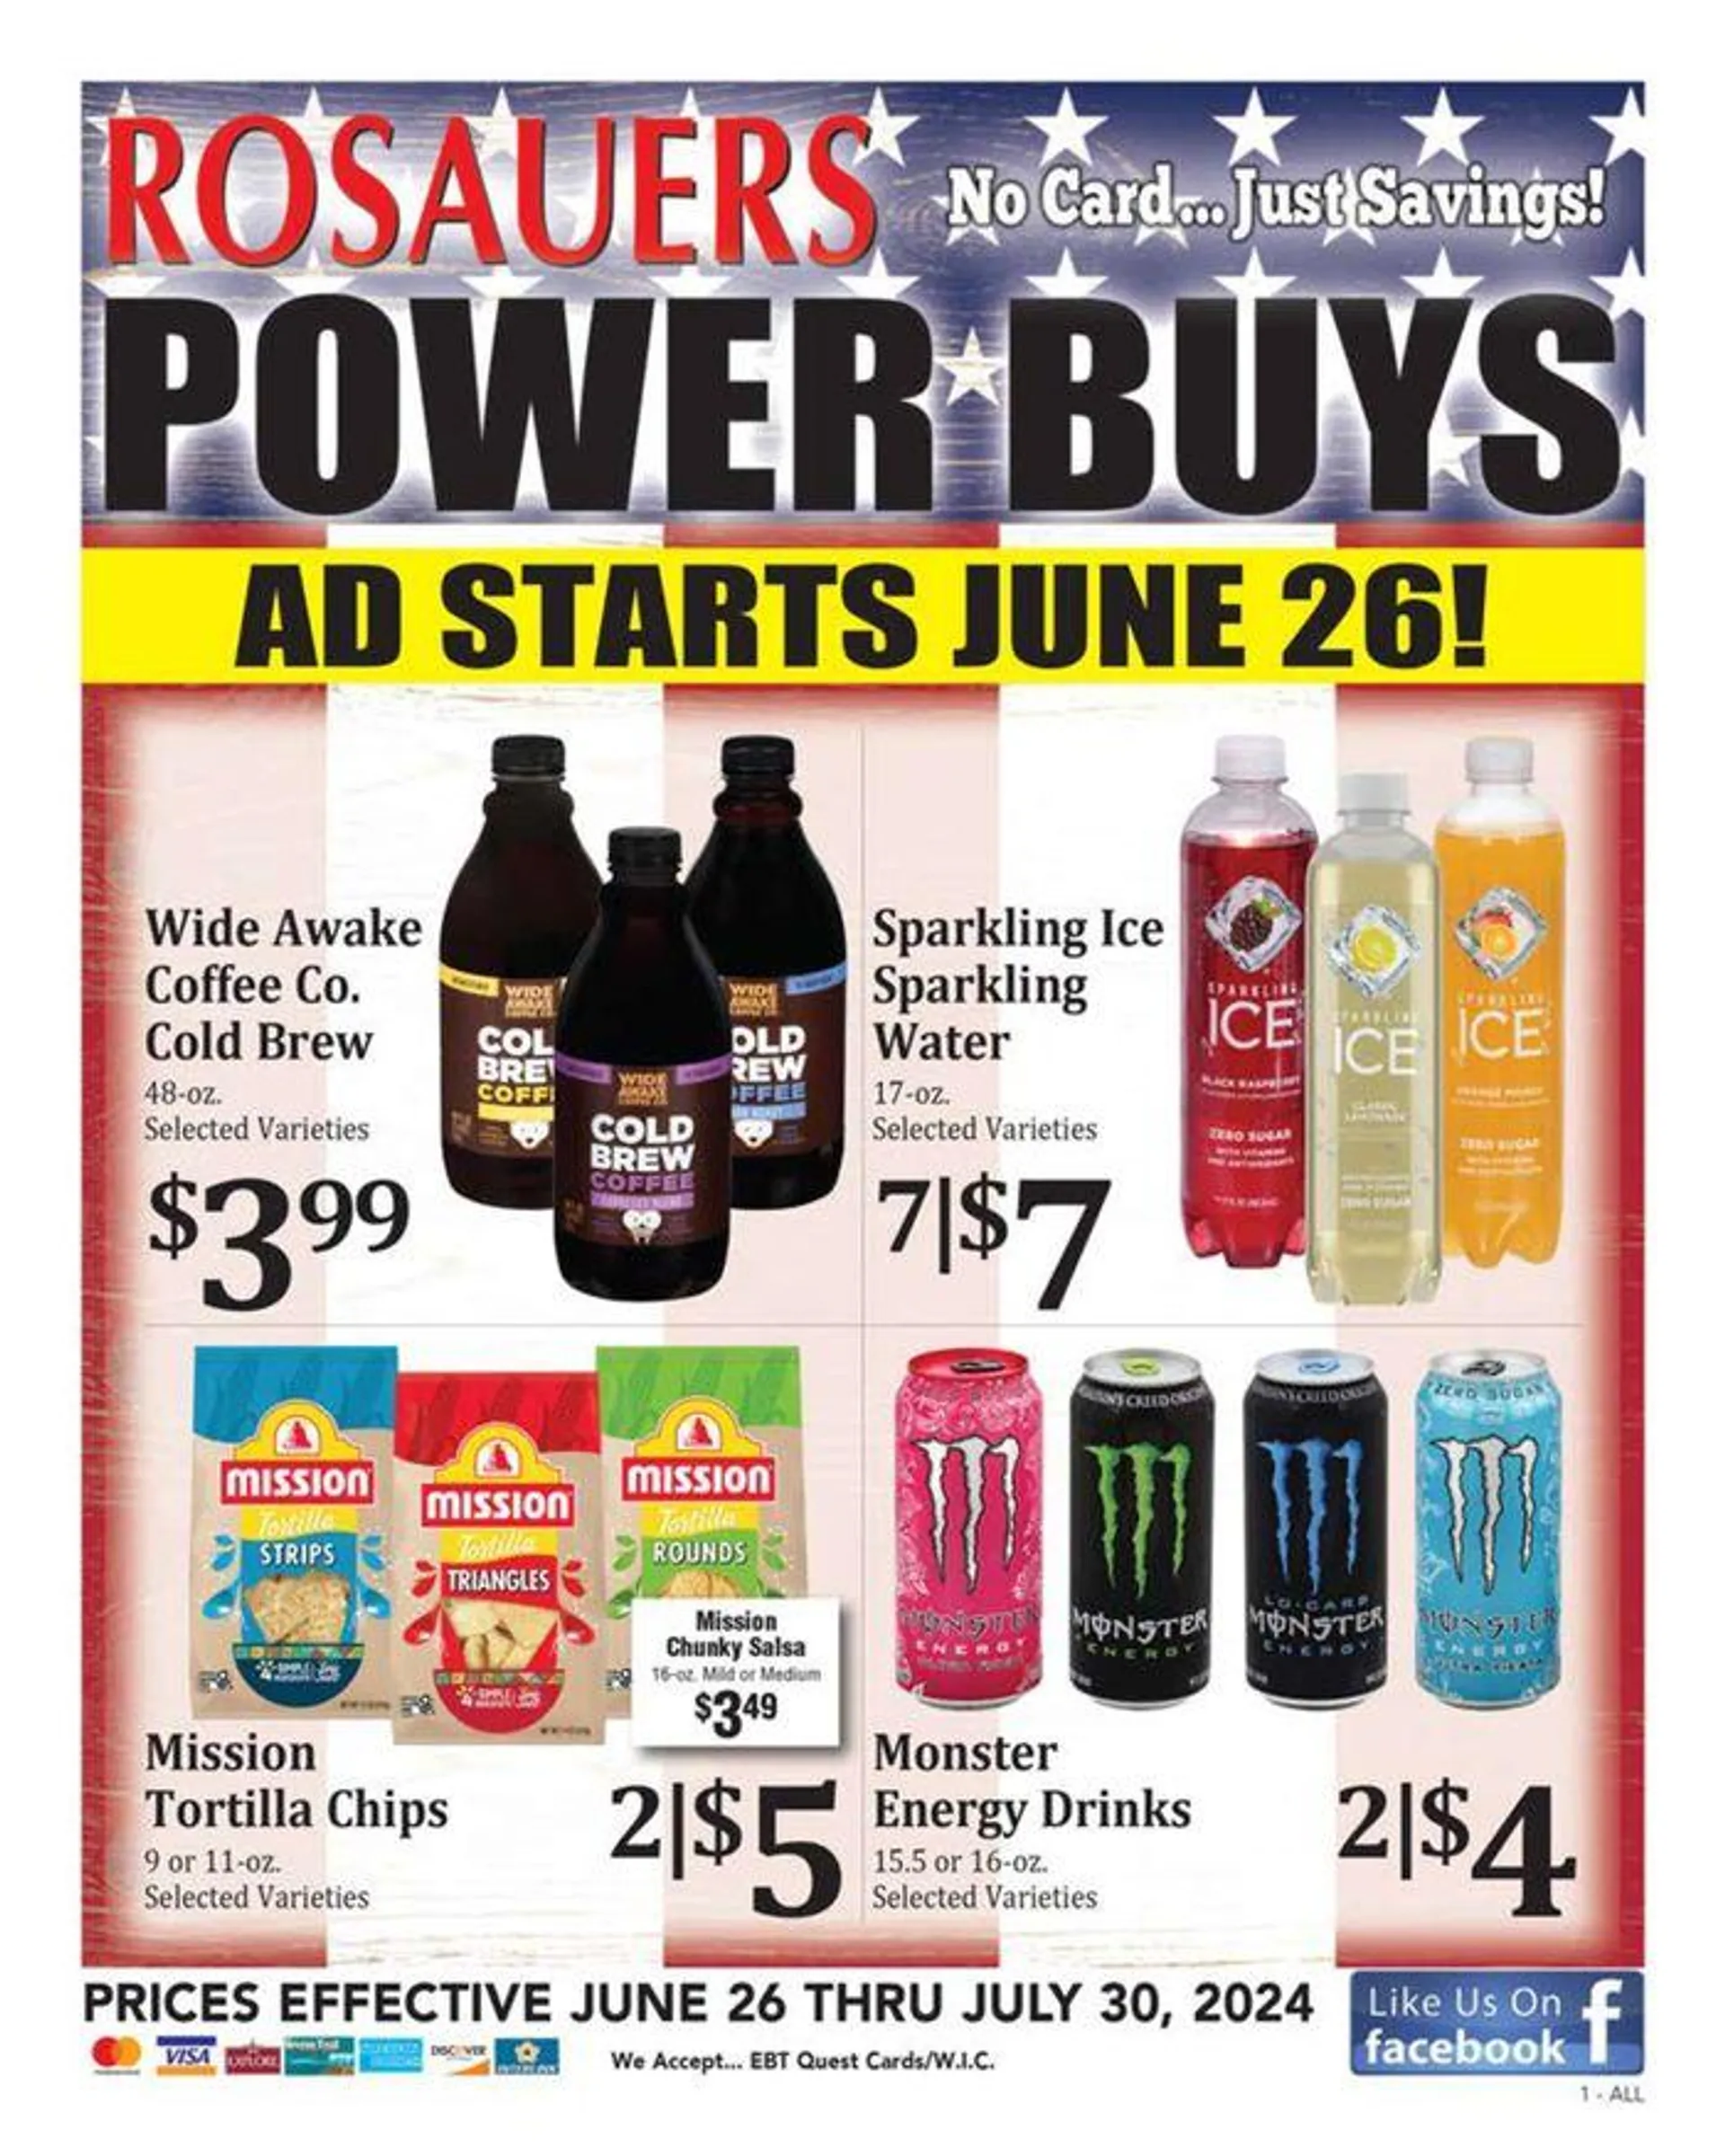 Rosauers Monthly Power Buys - 1